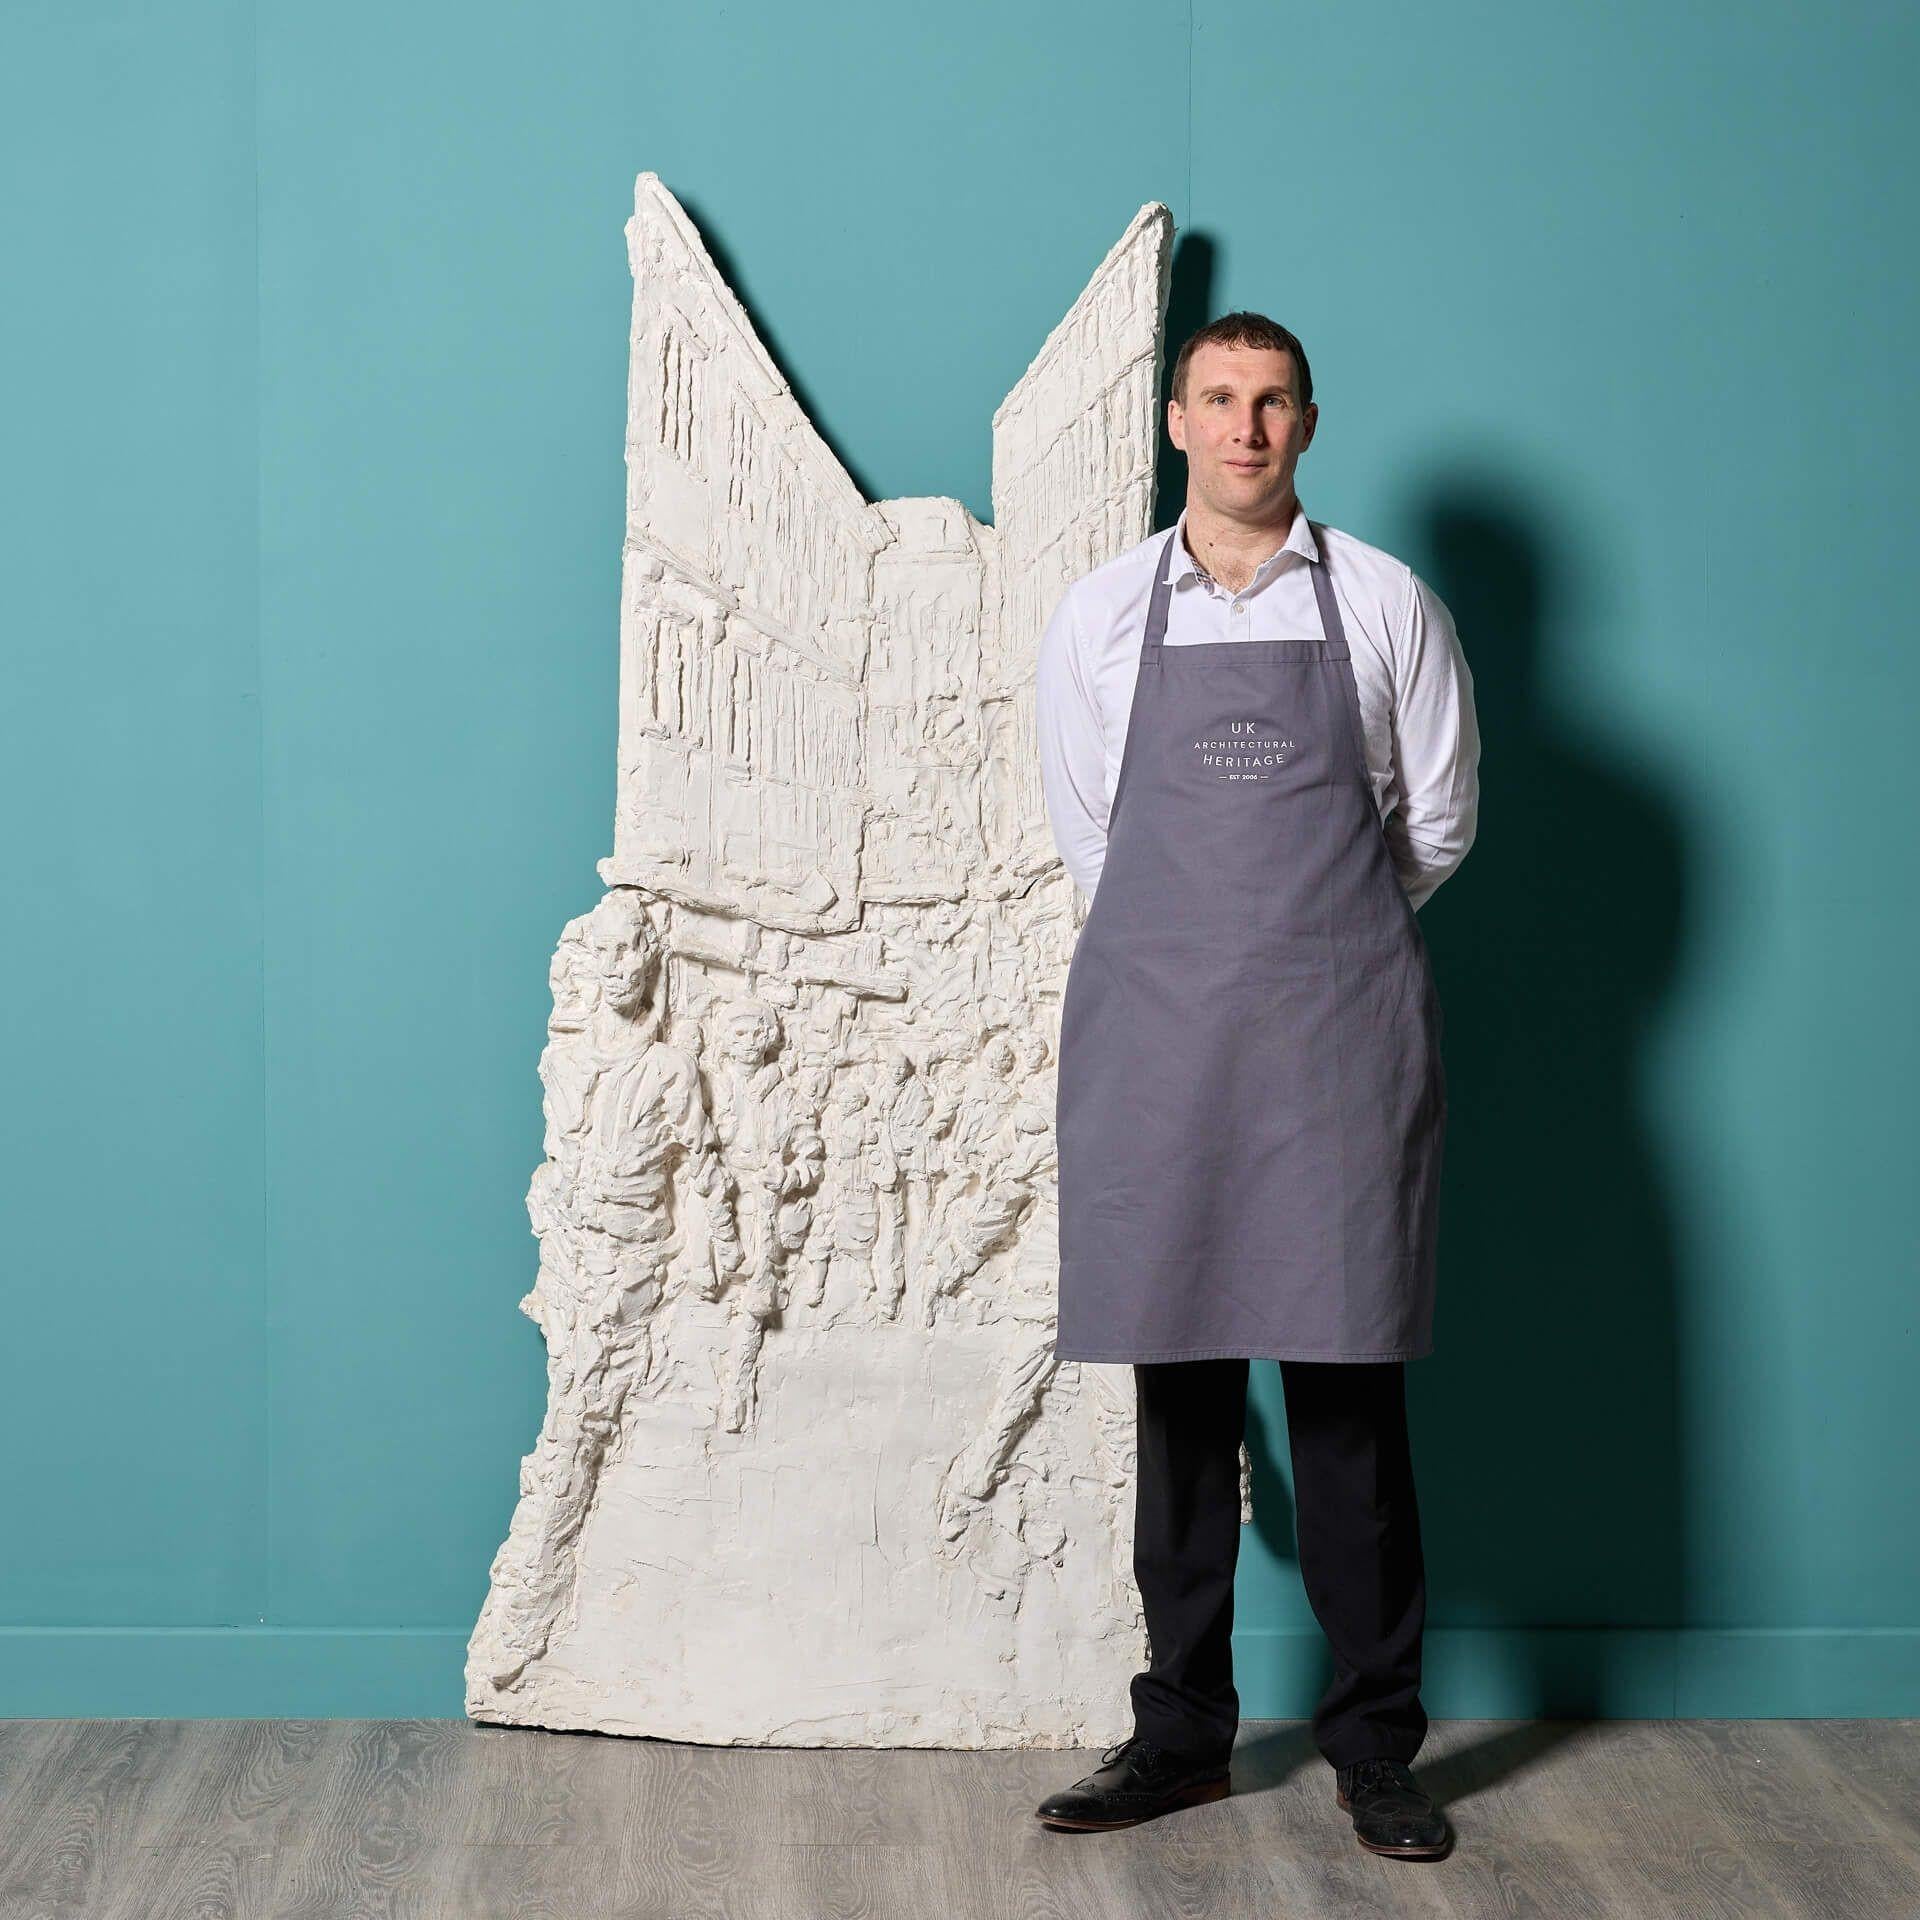 A large and intricately detailed plaster sculpture of a street scene by celebrated British sculptor, Paul Day. Thought to be an original maquette – a model for a larger piece of sculpture or a later bronze – this 3D wall sculpture reflects Day’s